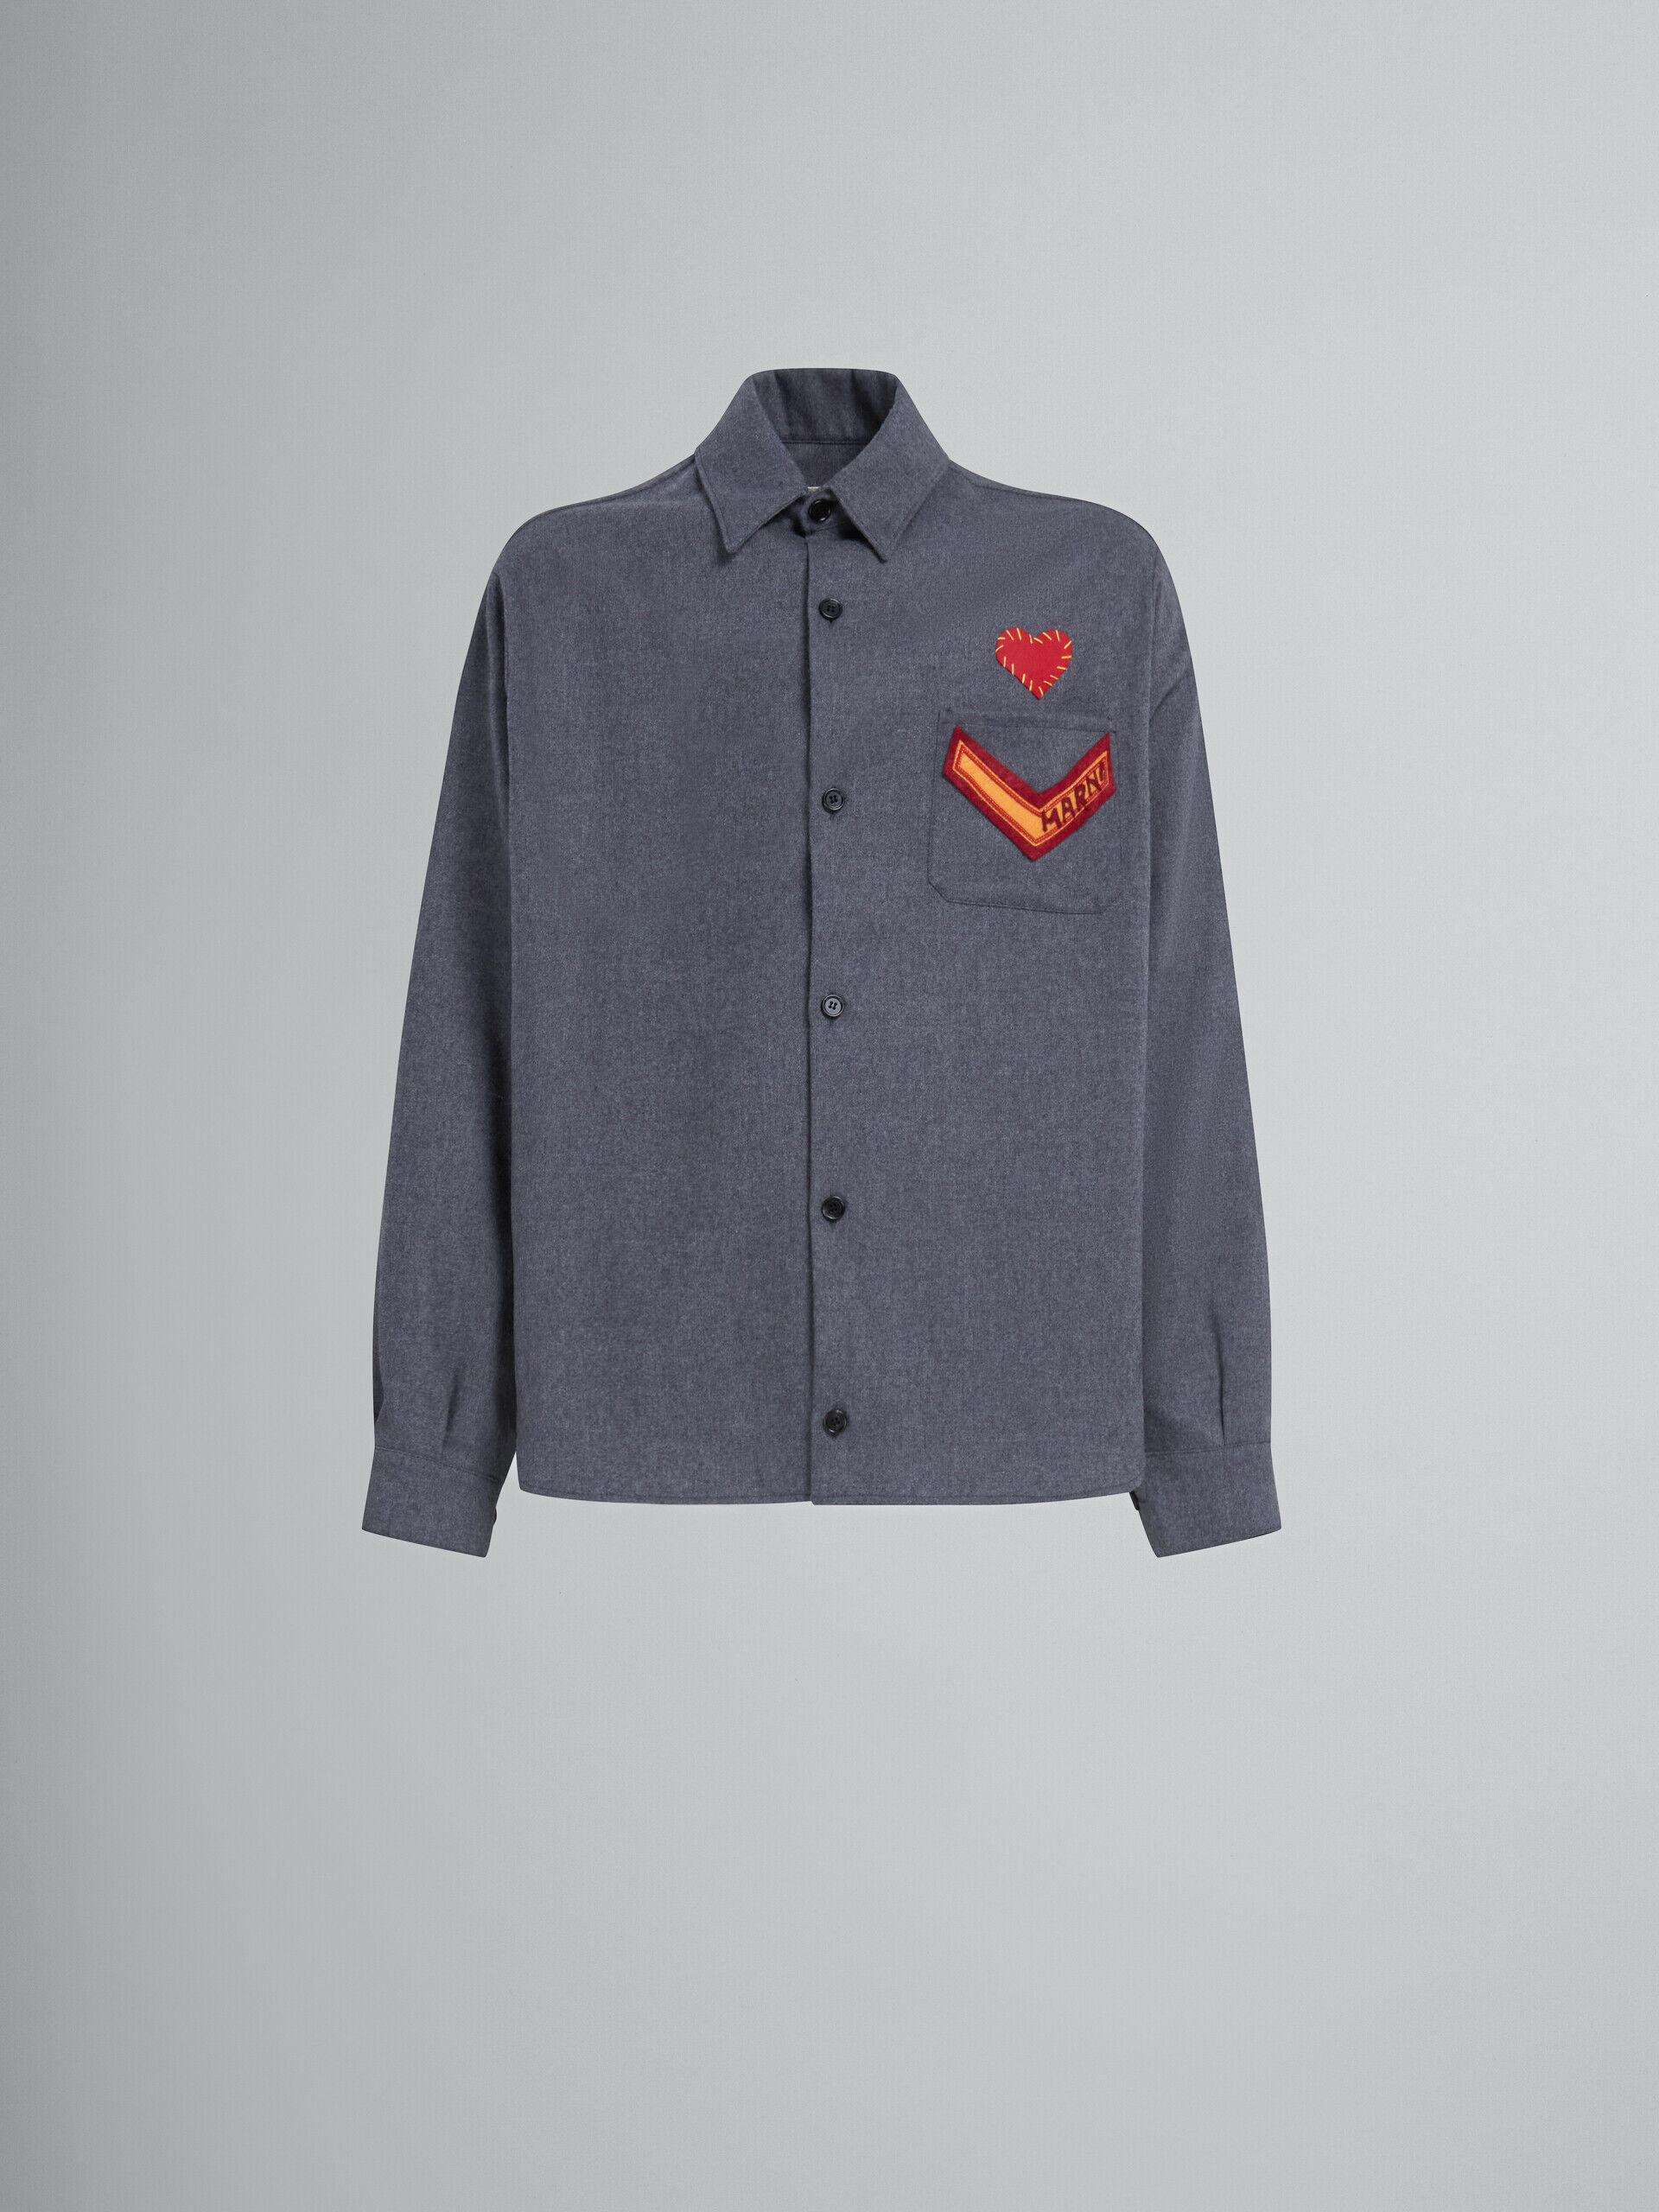 Grey flannel shirt with patches | Marni